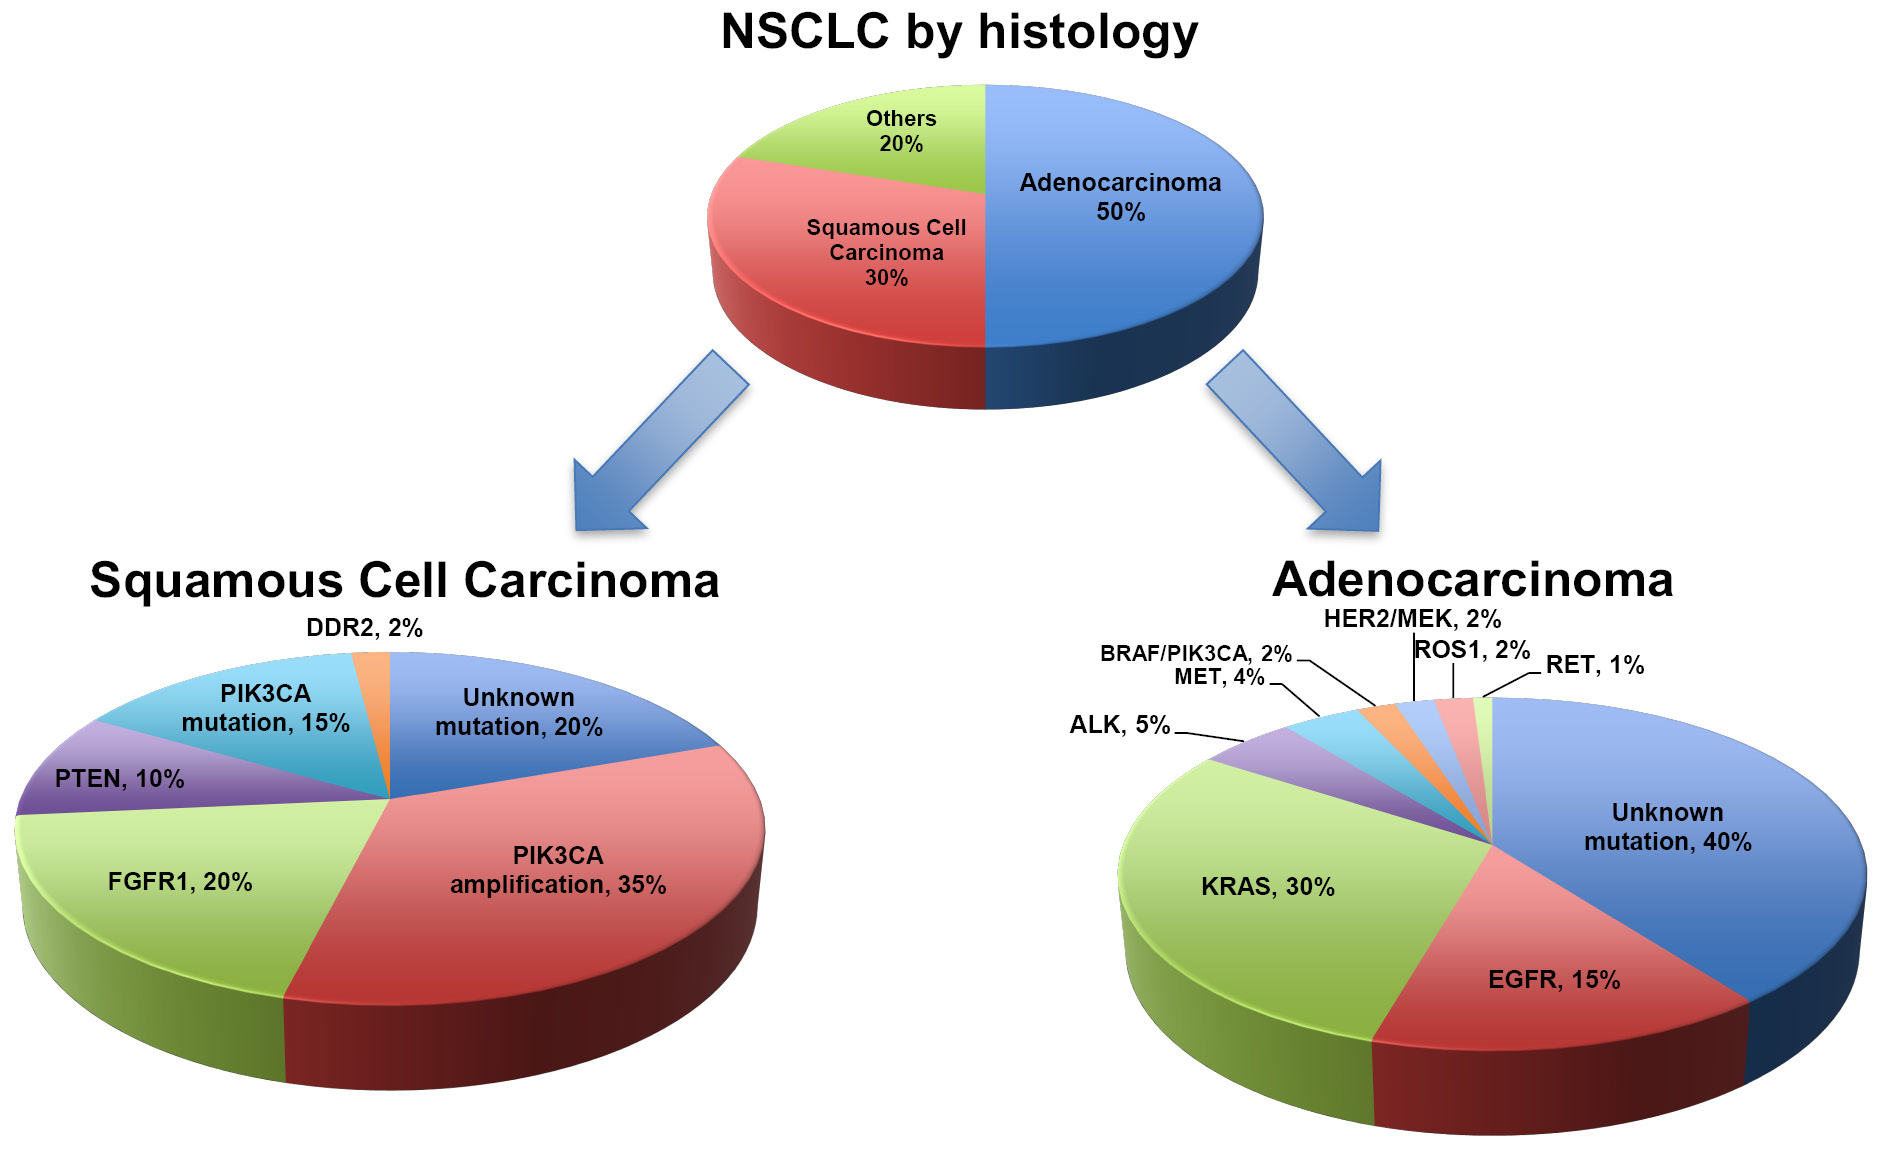 What is non-small cell carcinoma?